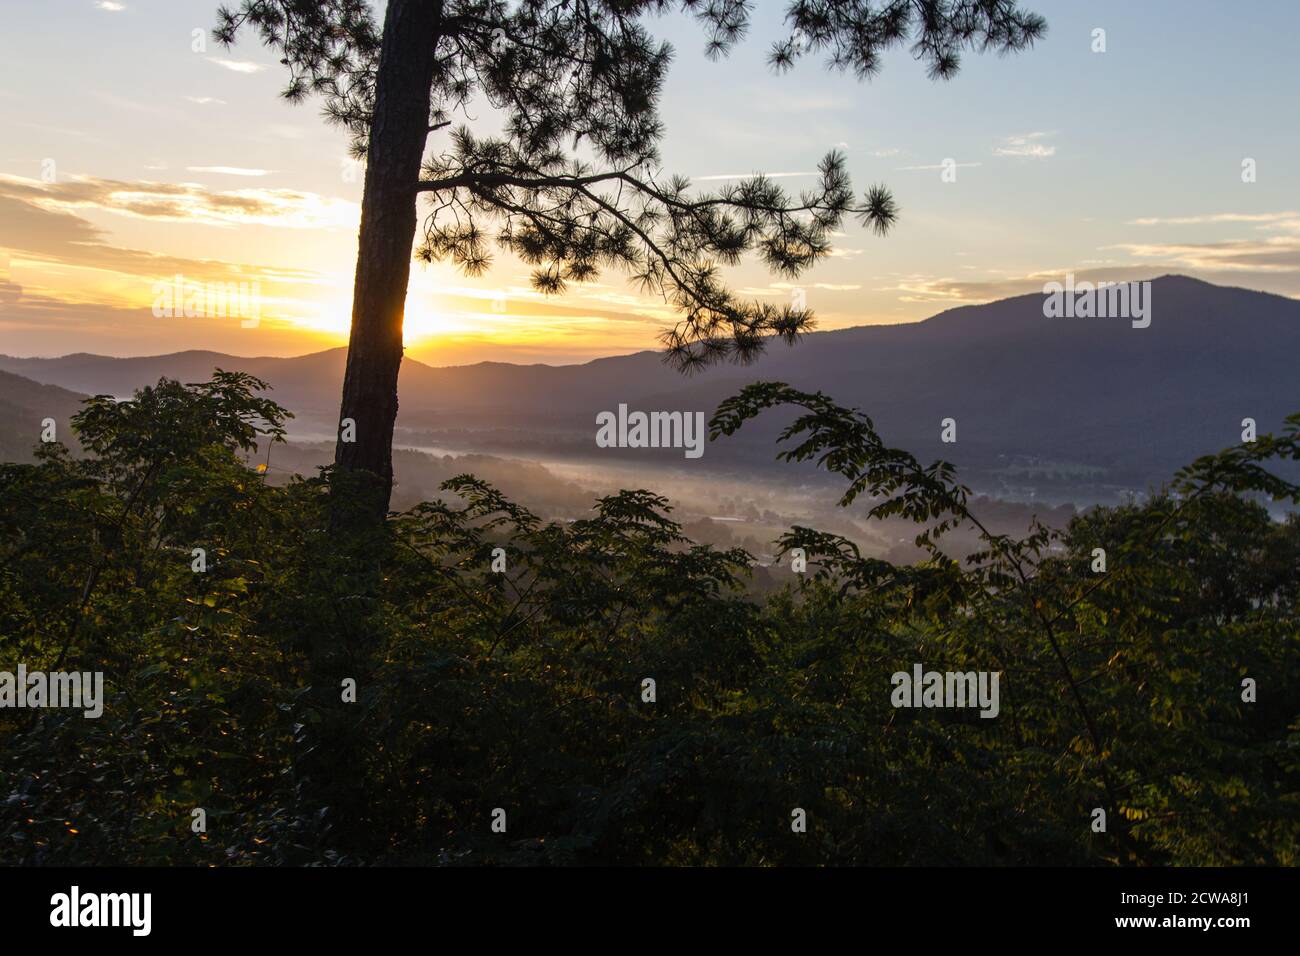 Morning Sunrise On Foothills Parkway. Sunrise over a misty valley as seen from an overlook on the recently opened section of the Foothills Parkway. Stock Photo